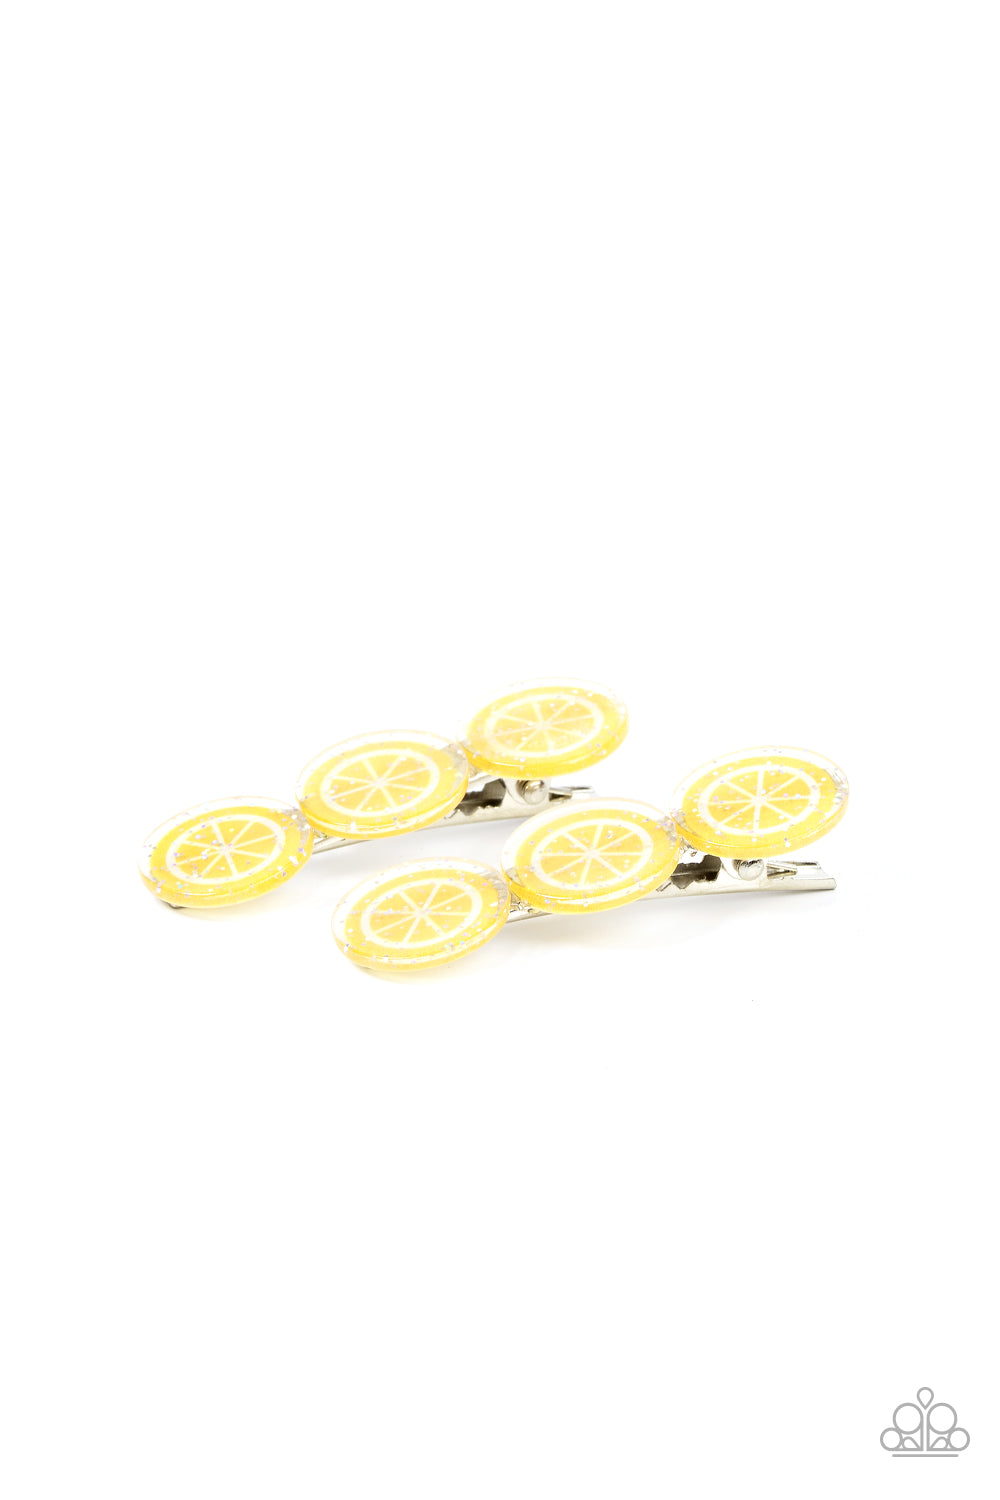 Charismatically Citrus - Yellow and Silver Hair Clips- Paparazzi Accessories